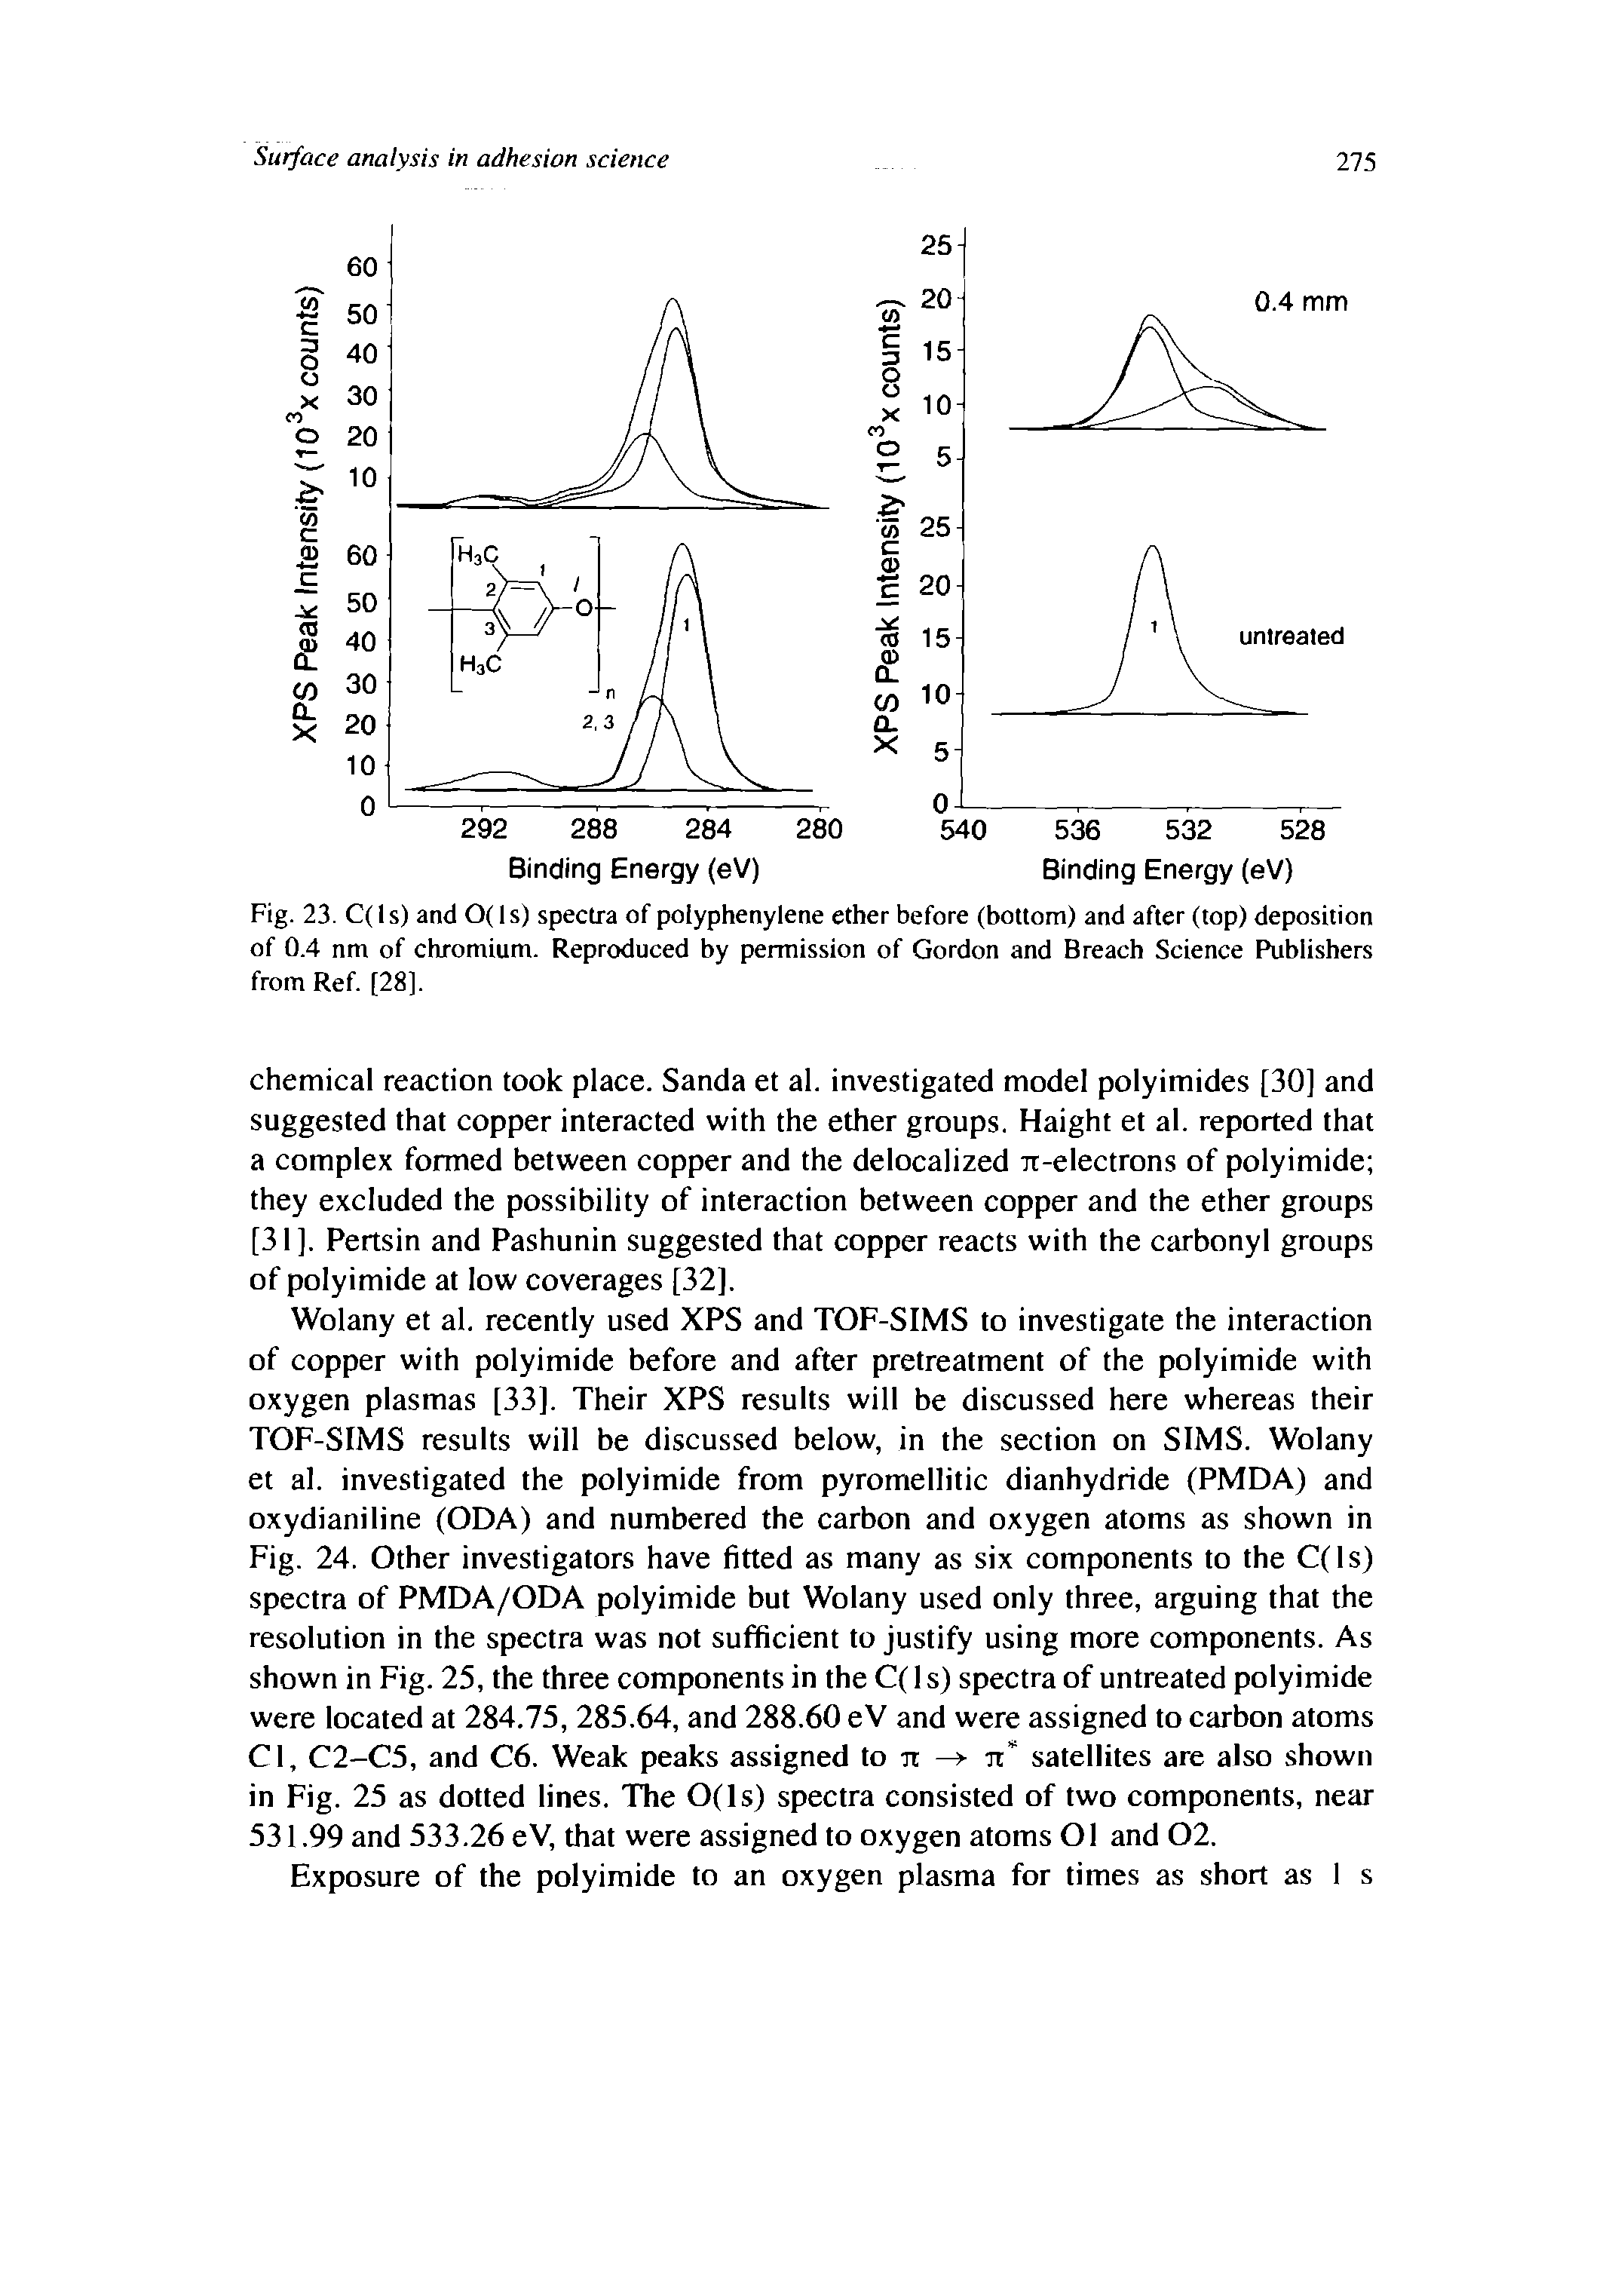 Fig. 23. C(ls) and 0(ls) spectra of polyphenylene ether before (hottom) and after (top) deposition of 0.4 nm of chromium. Reproduced hy permission of Gordon and Breach Science Publishers from Ref. [28].